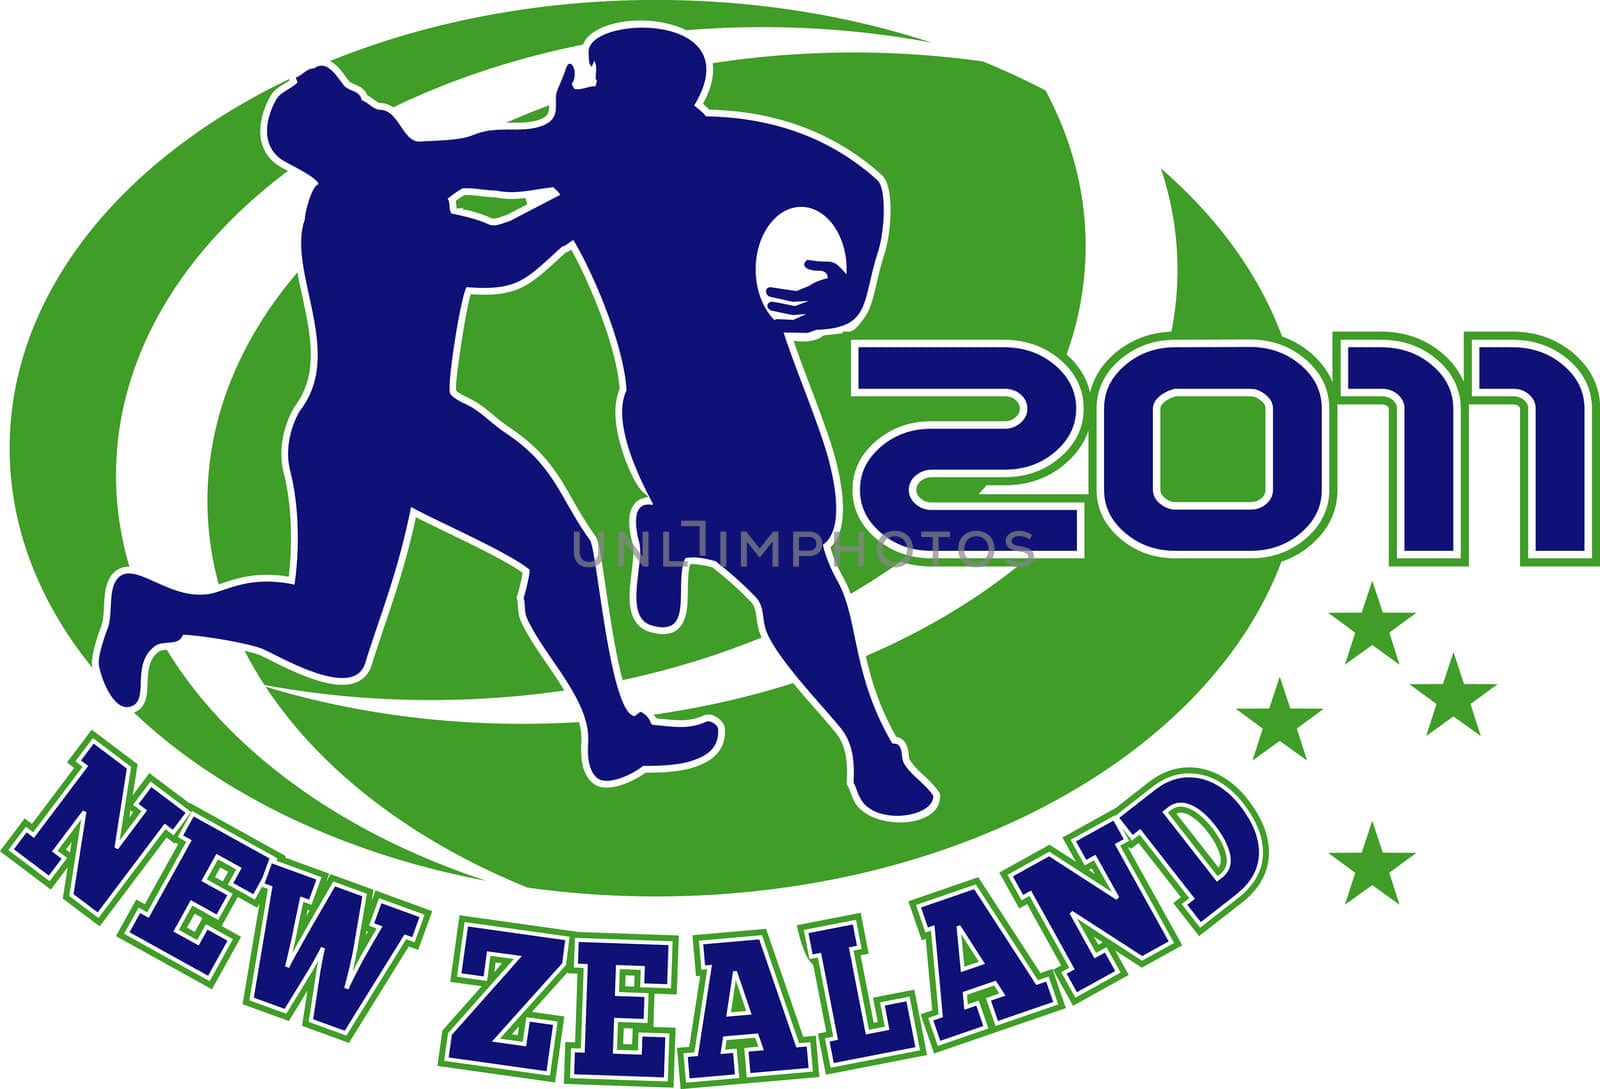 Rugby player tackle fending new zealand 2011 by patrimonio